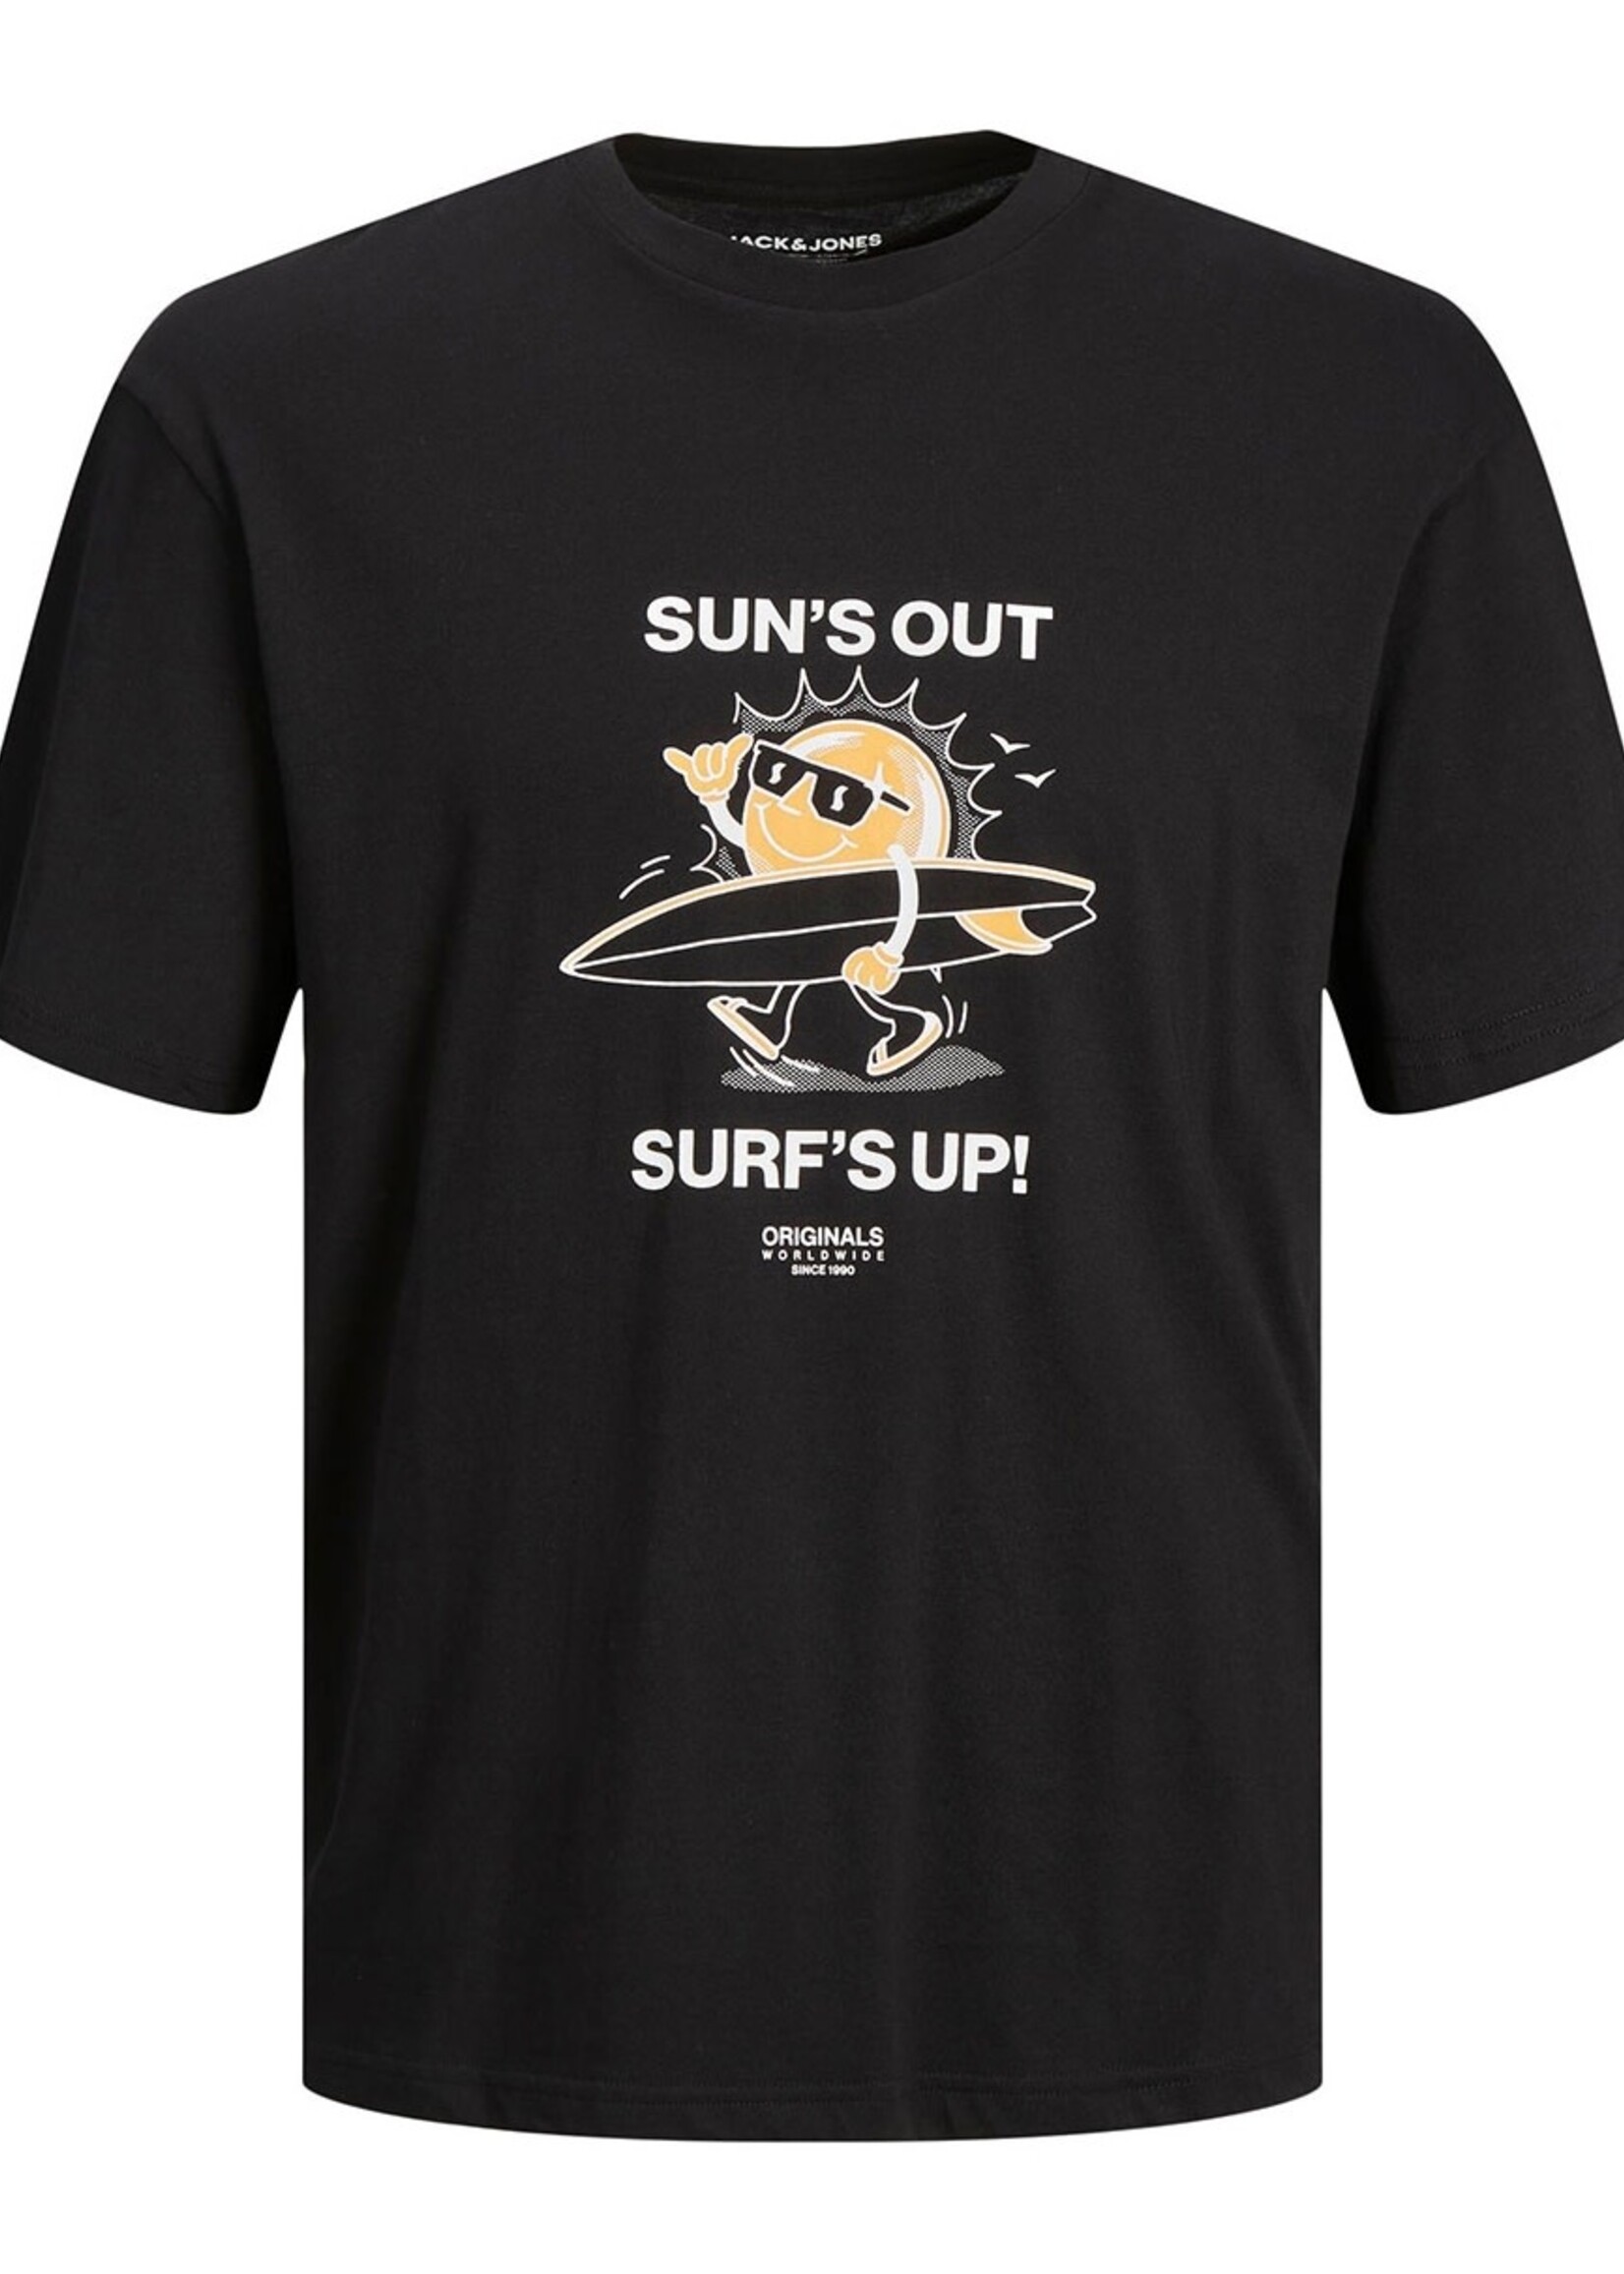 Toonie tee 'Sun's out - surf's up' - Black